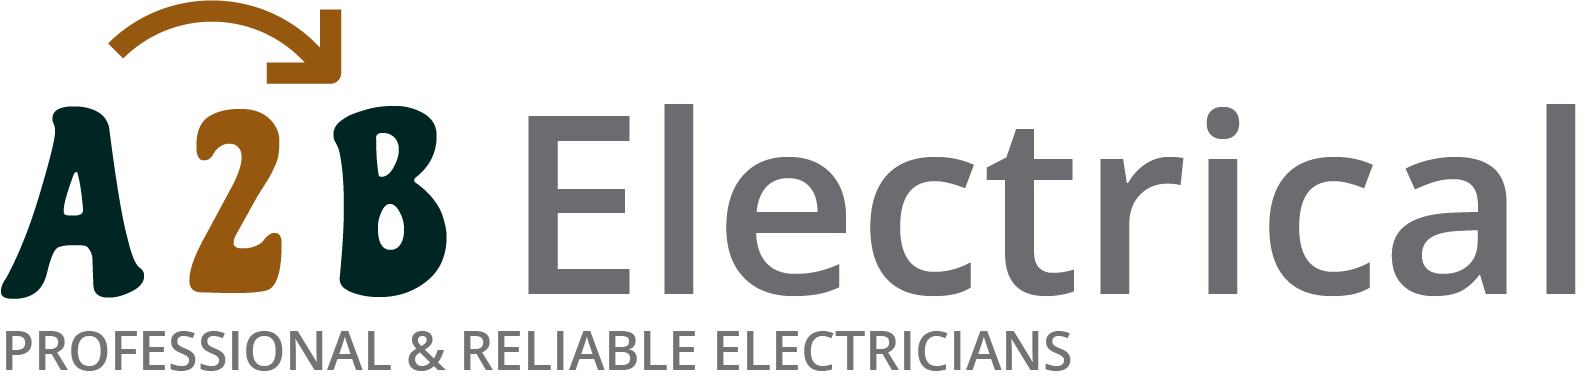 If you have electrical wiring problems in Huyton, we can provide an electrician to have a look for you. 